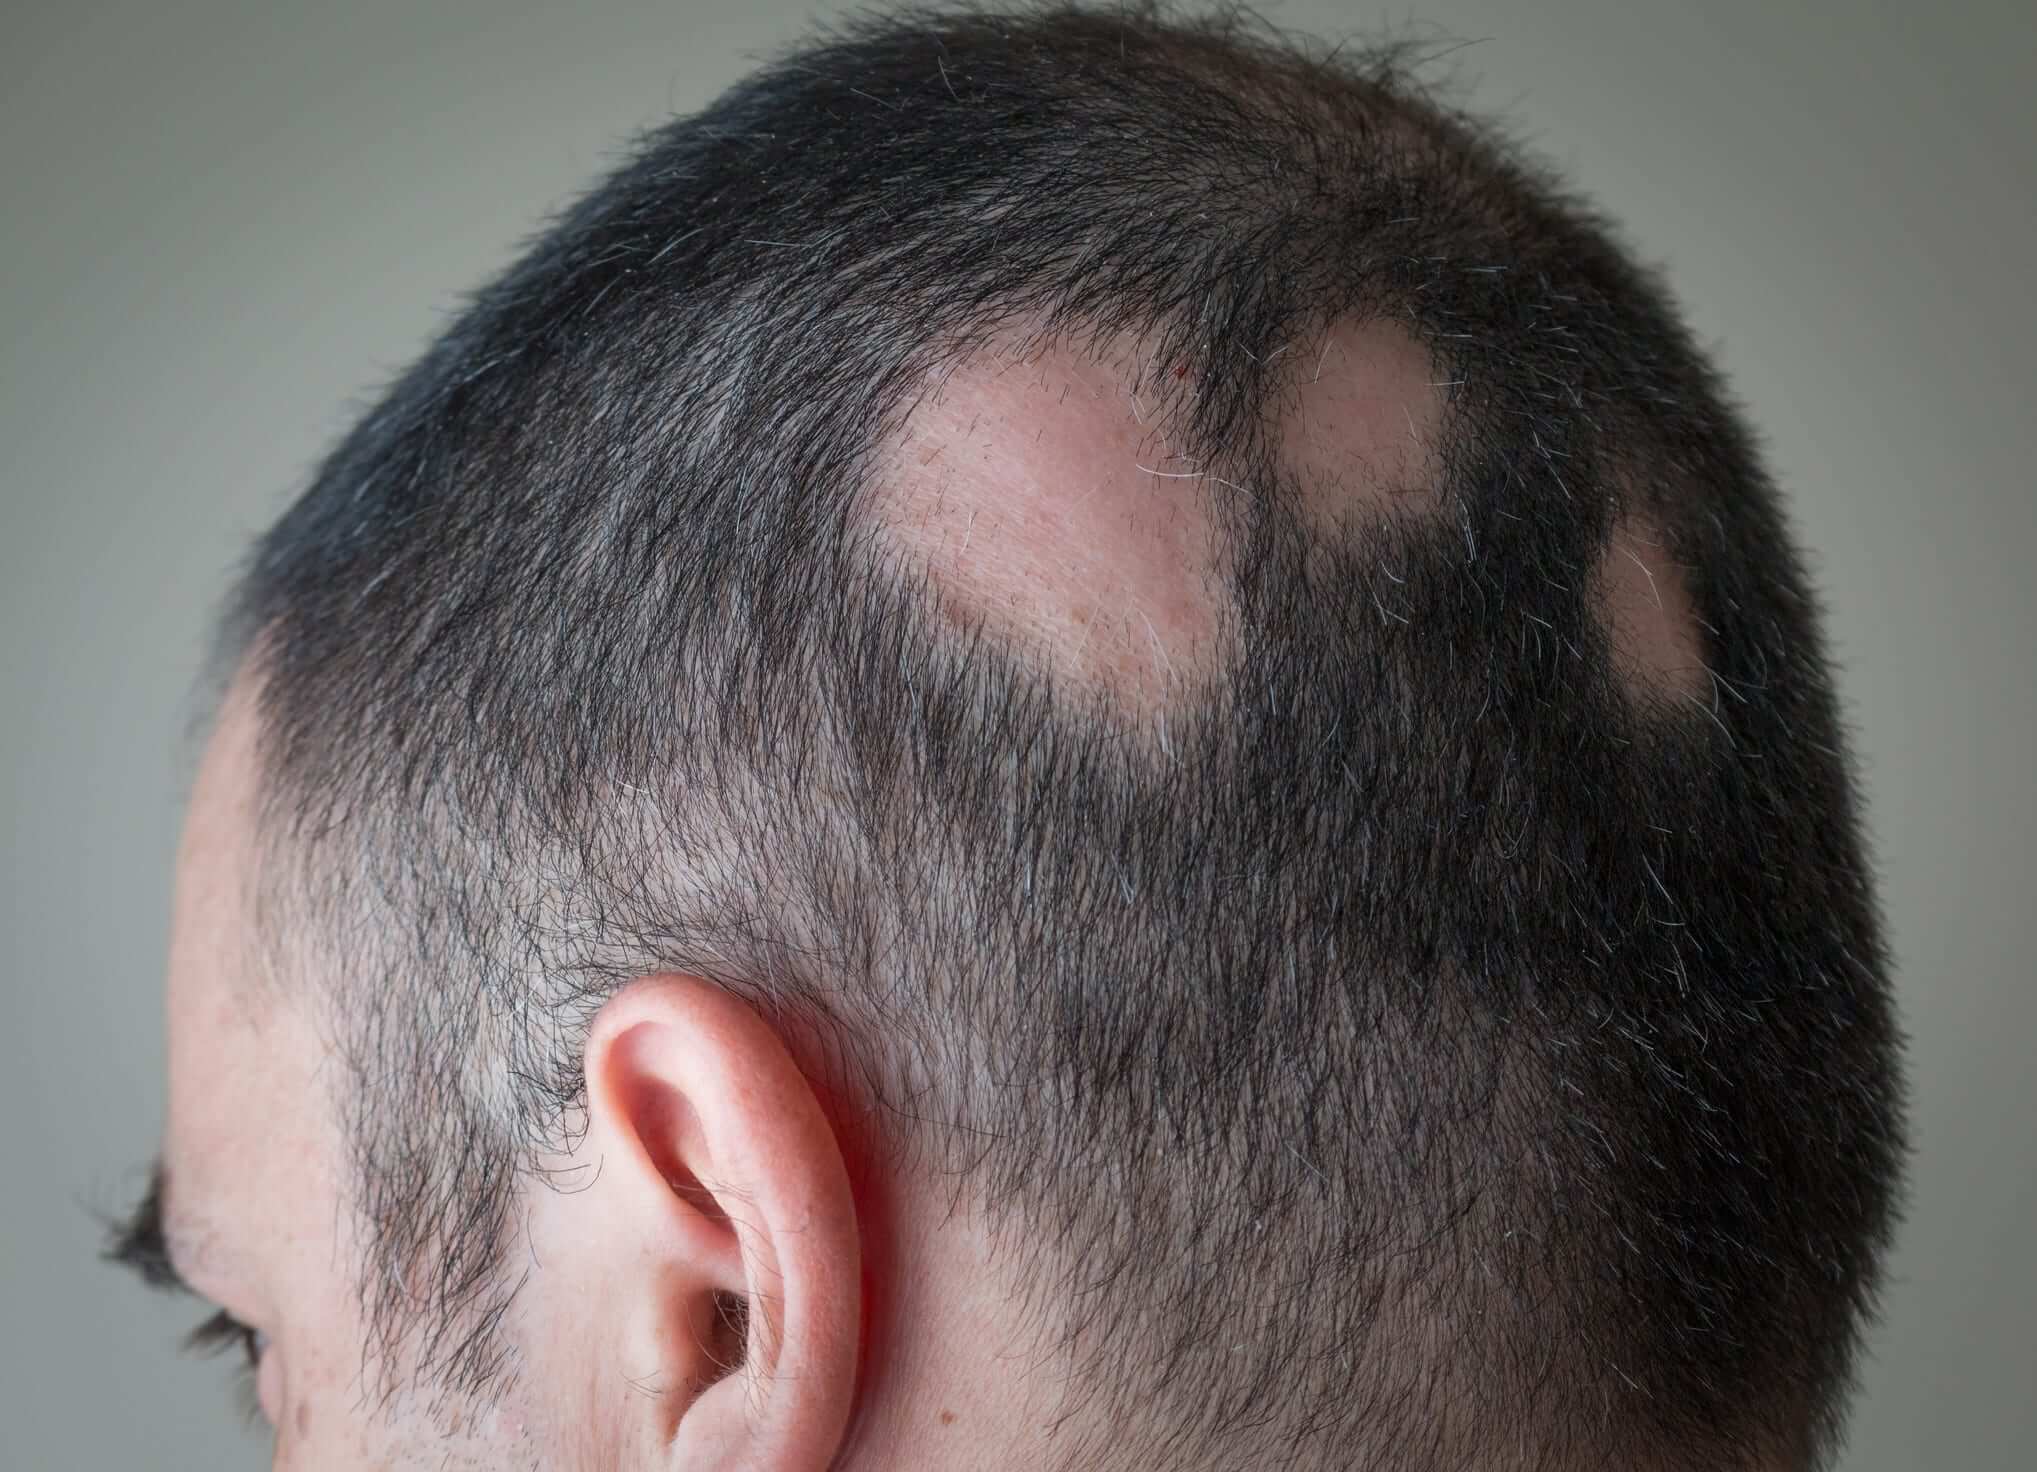 How Injections Can Help With Hair Loss